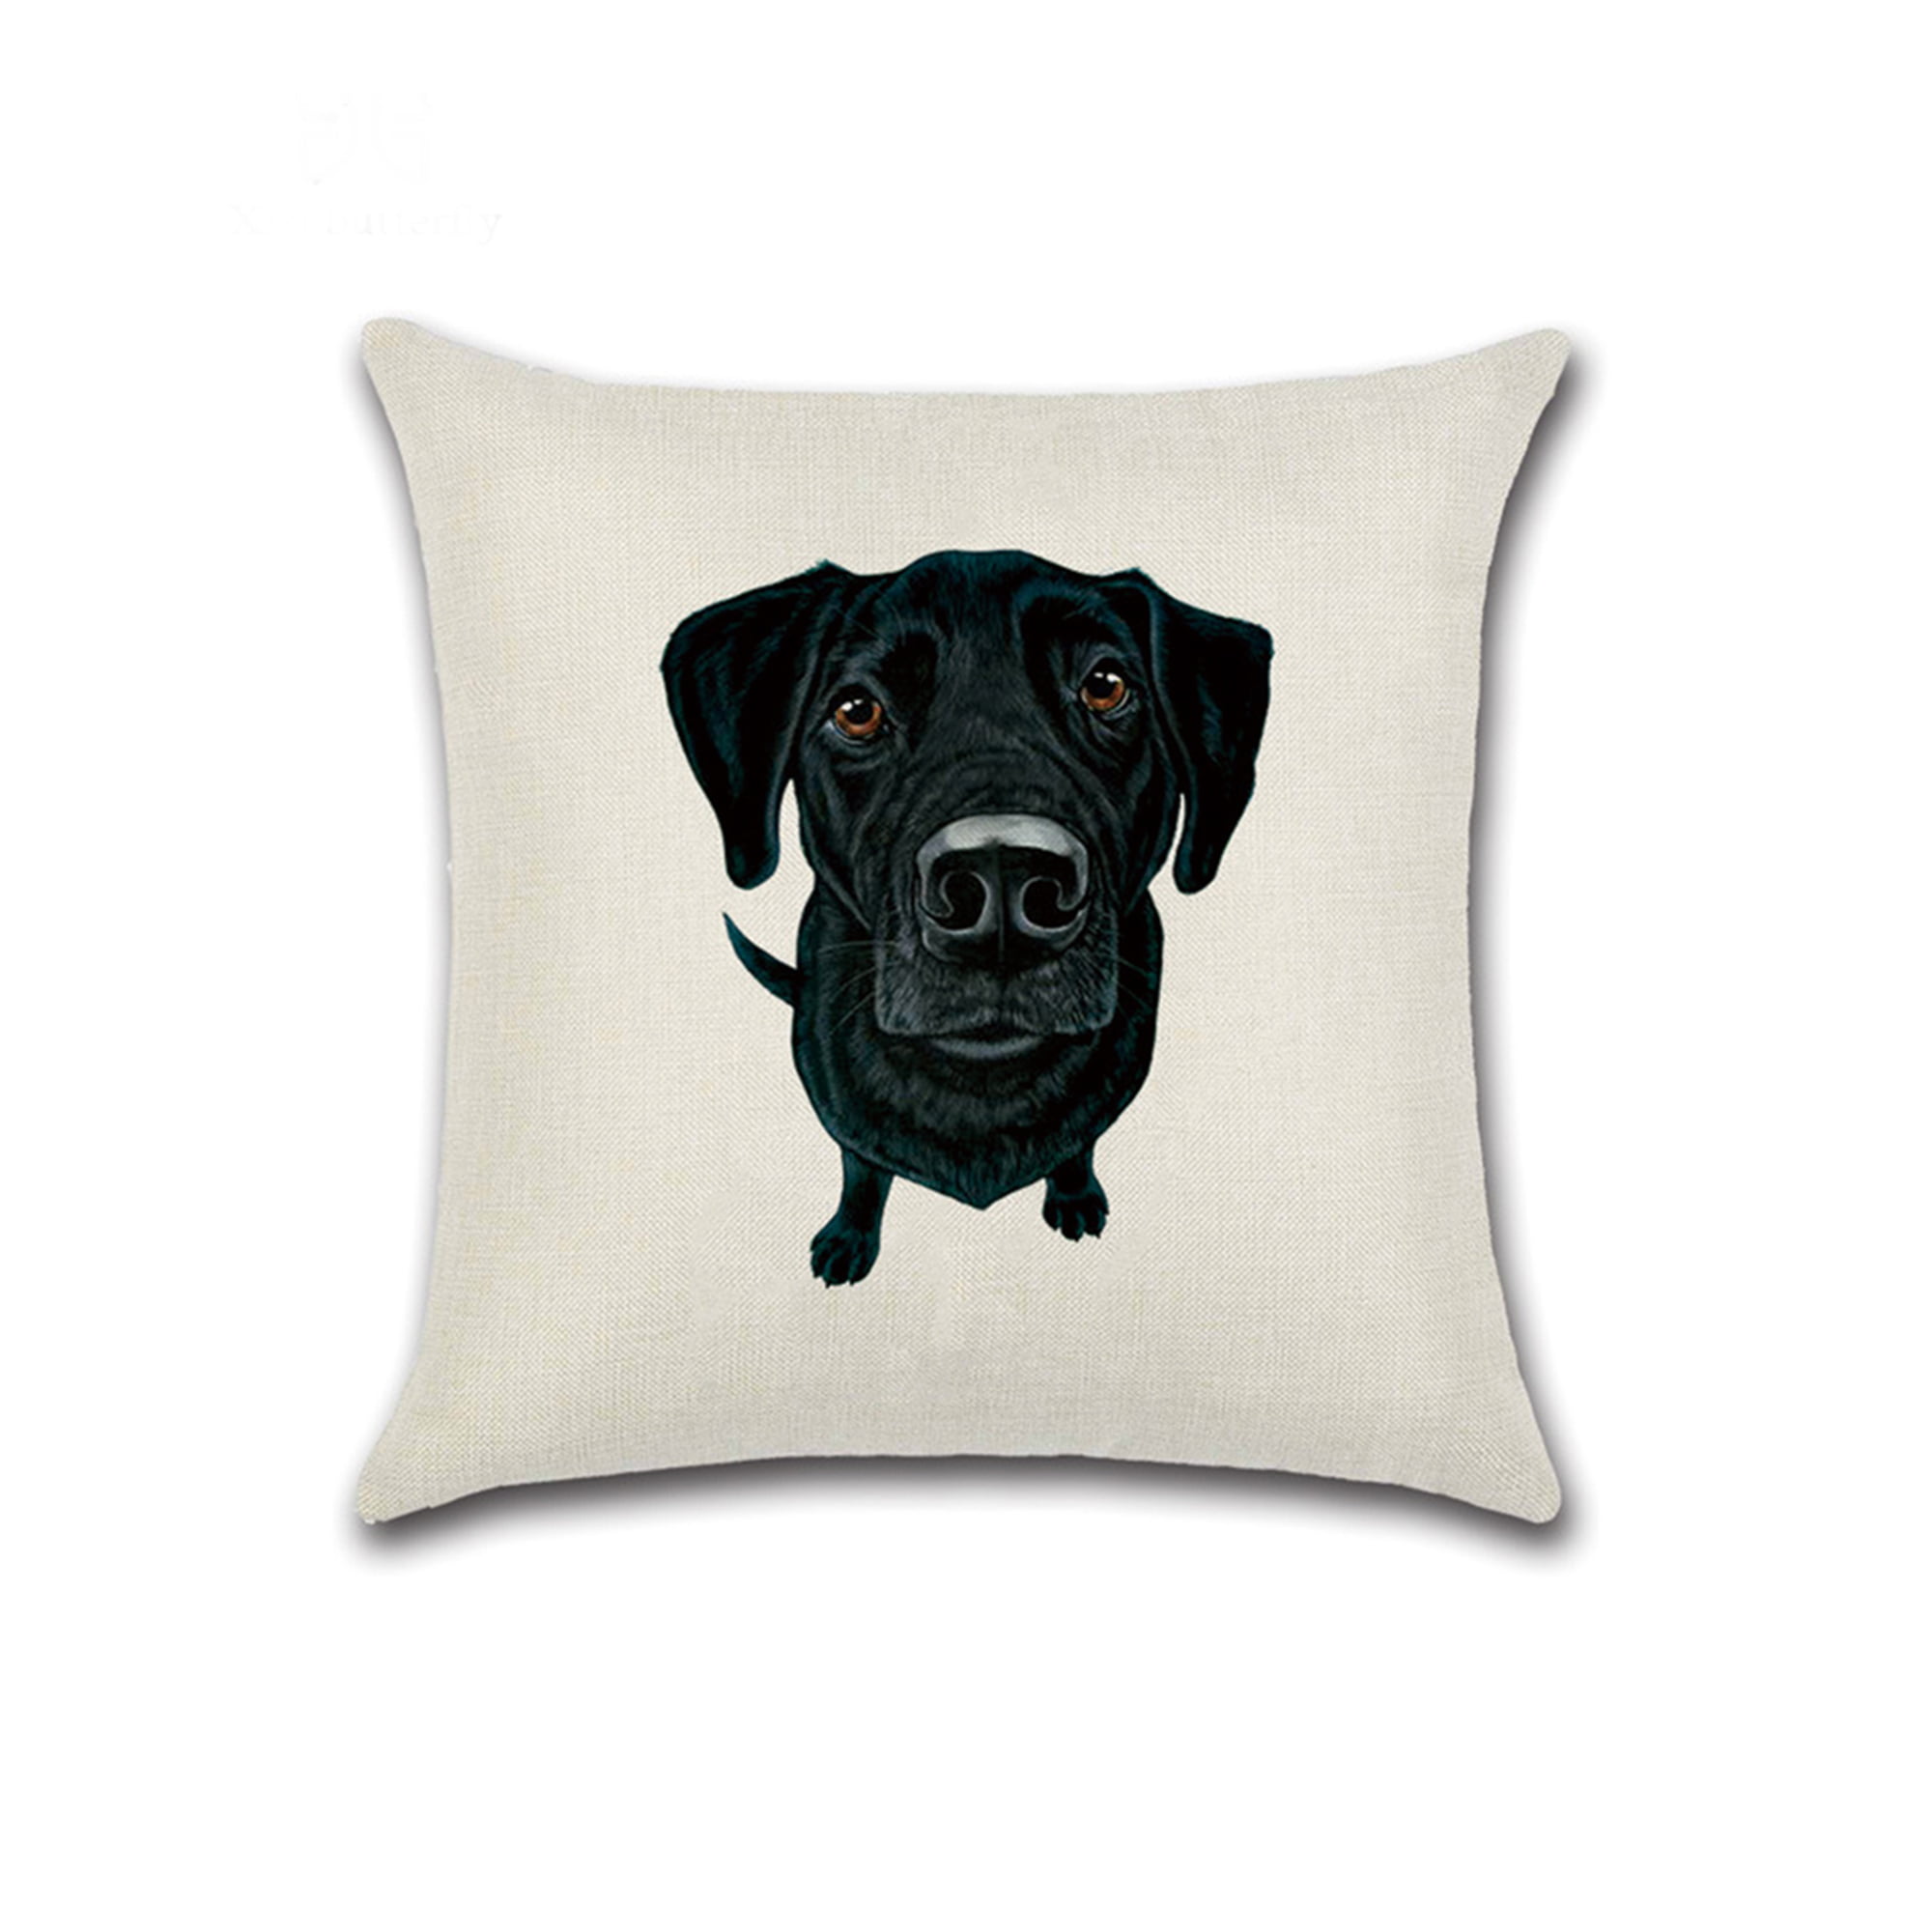 New FS Home Collections Black Lab Pillow Cover 12x12 